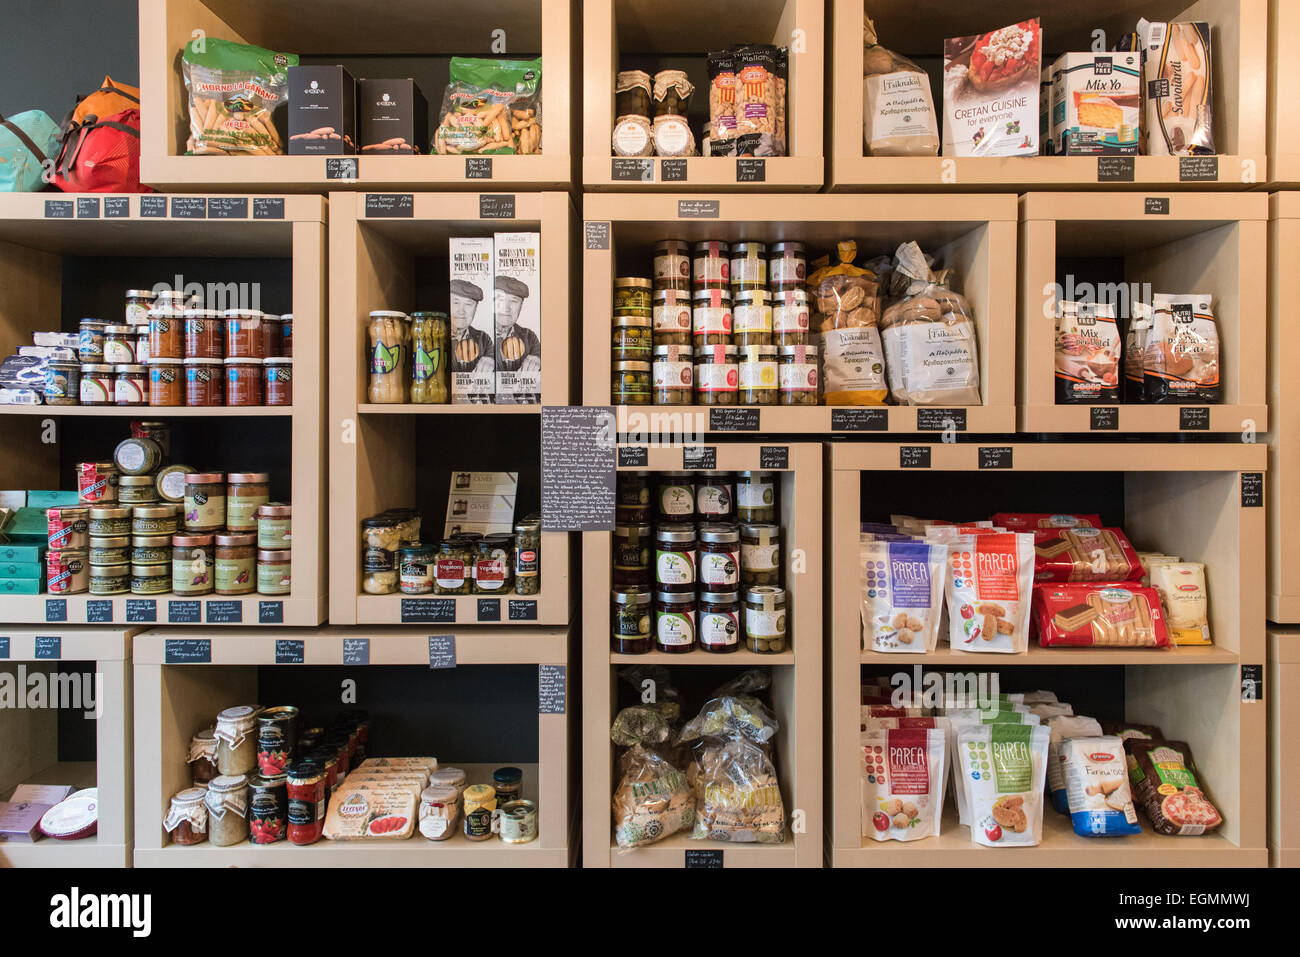 interior of posh luxury gourmet food and drink shop, showing the shelves packed with tasty food products like cheeses & jams etc Stock Photo